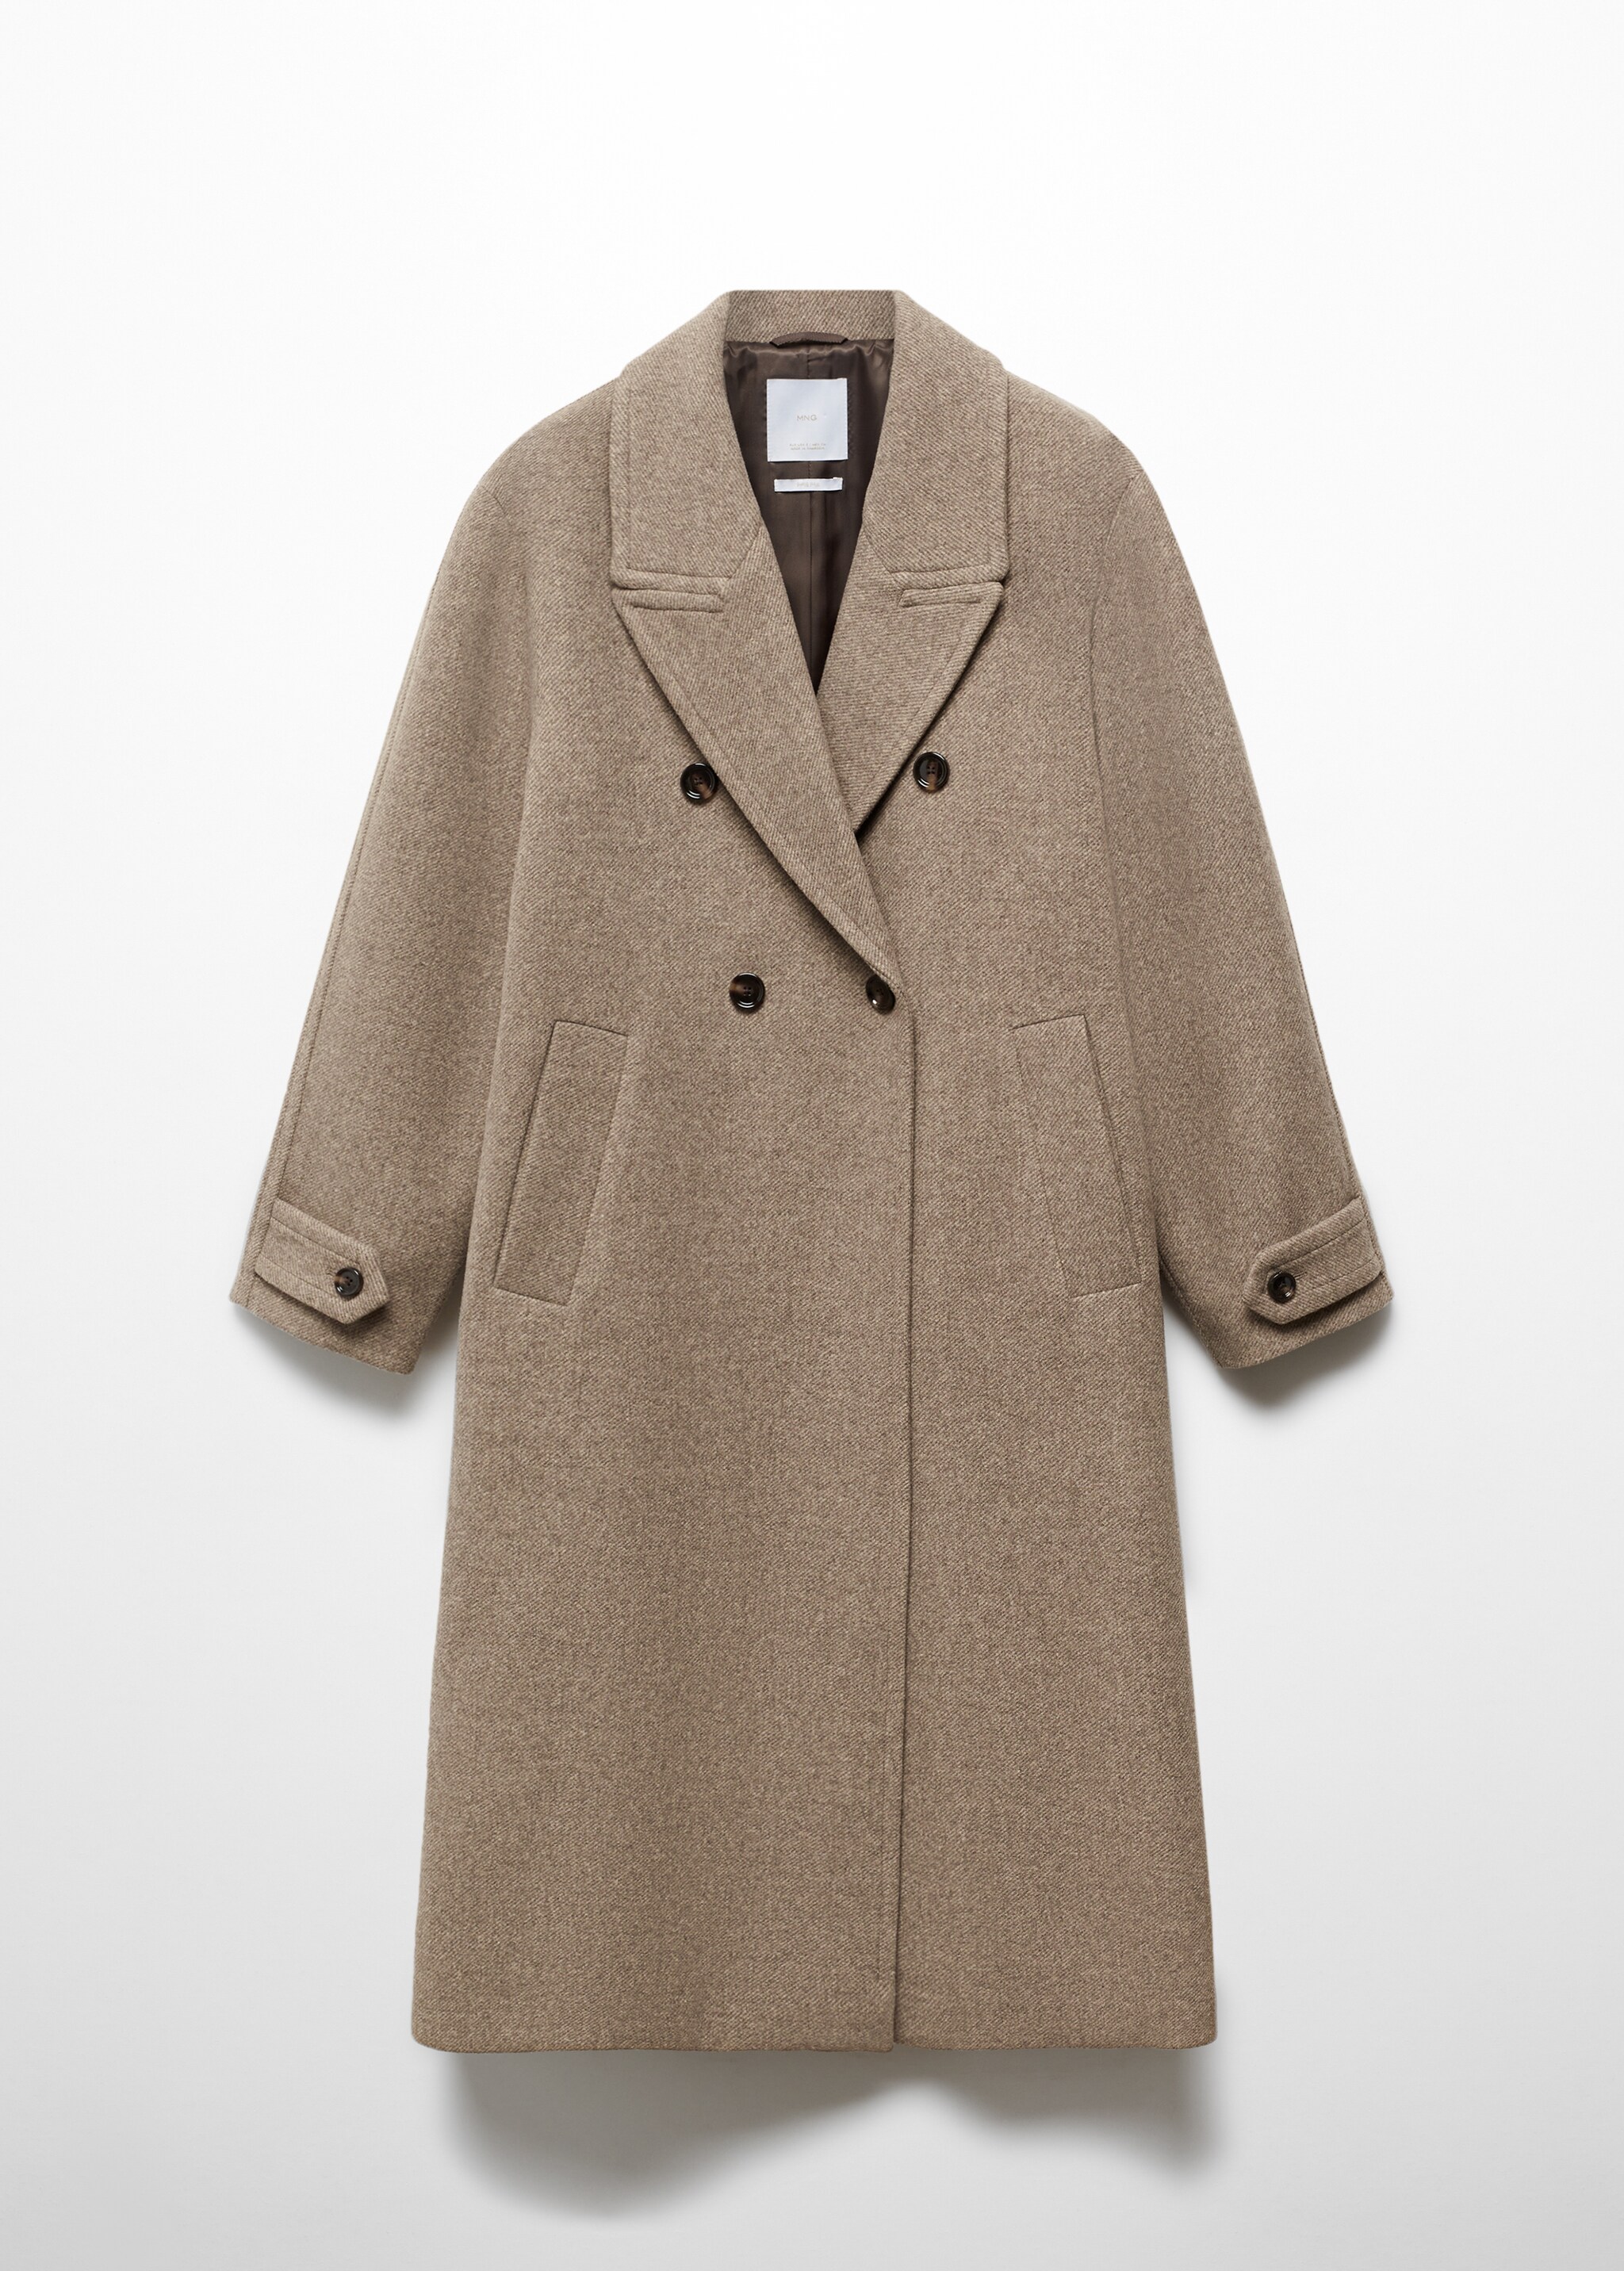 Oversize wool coat - Article without model